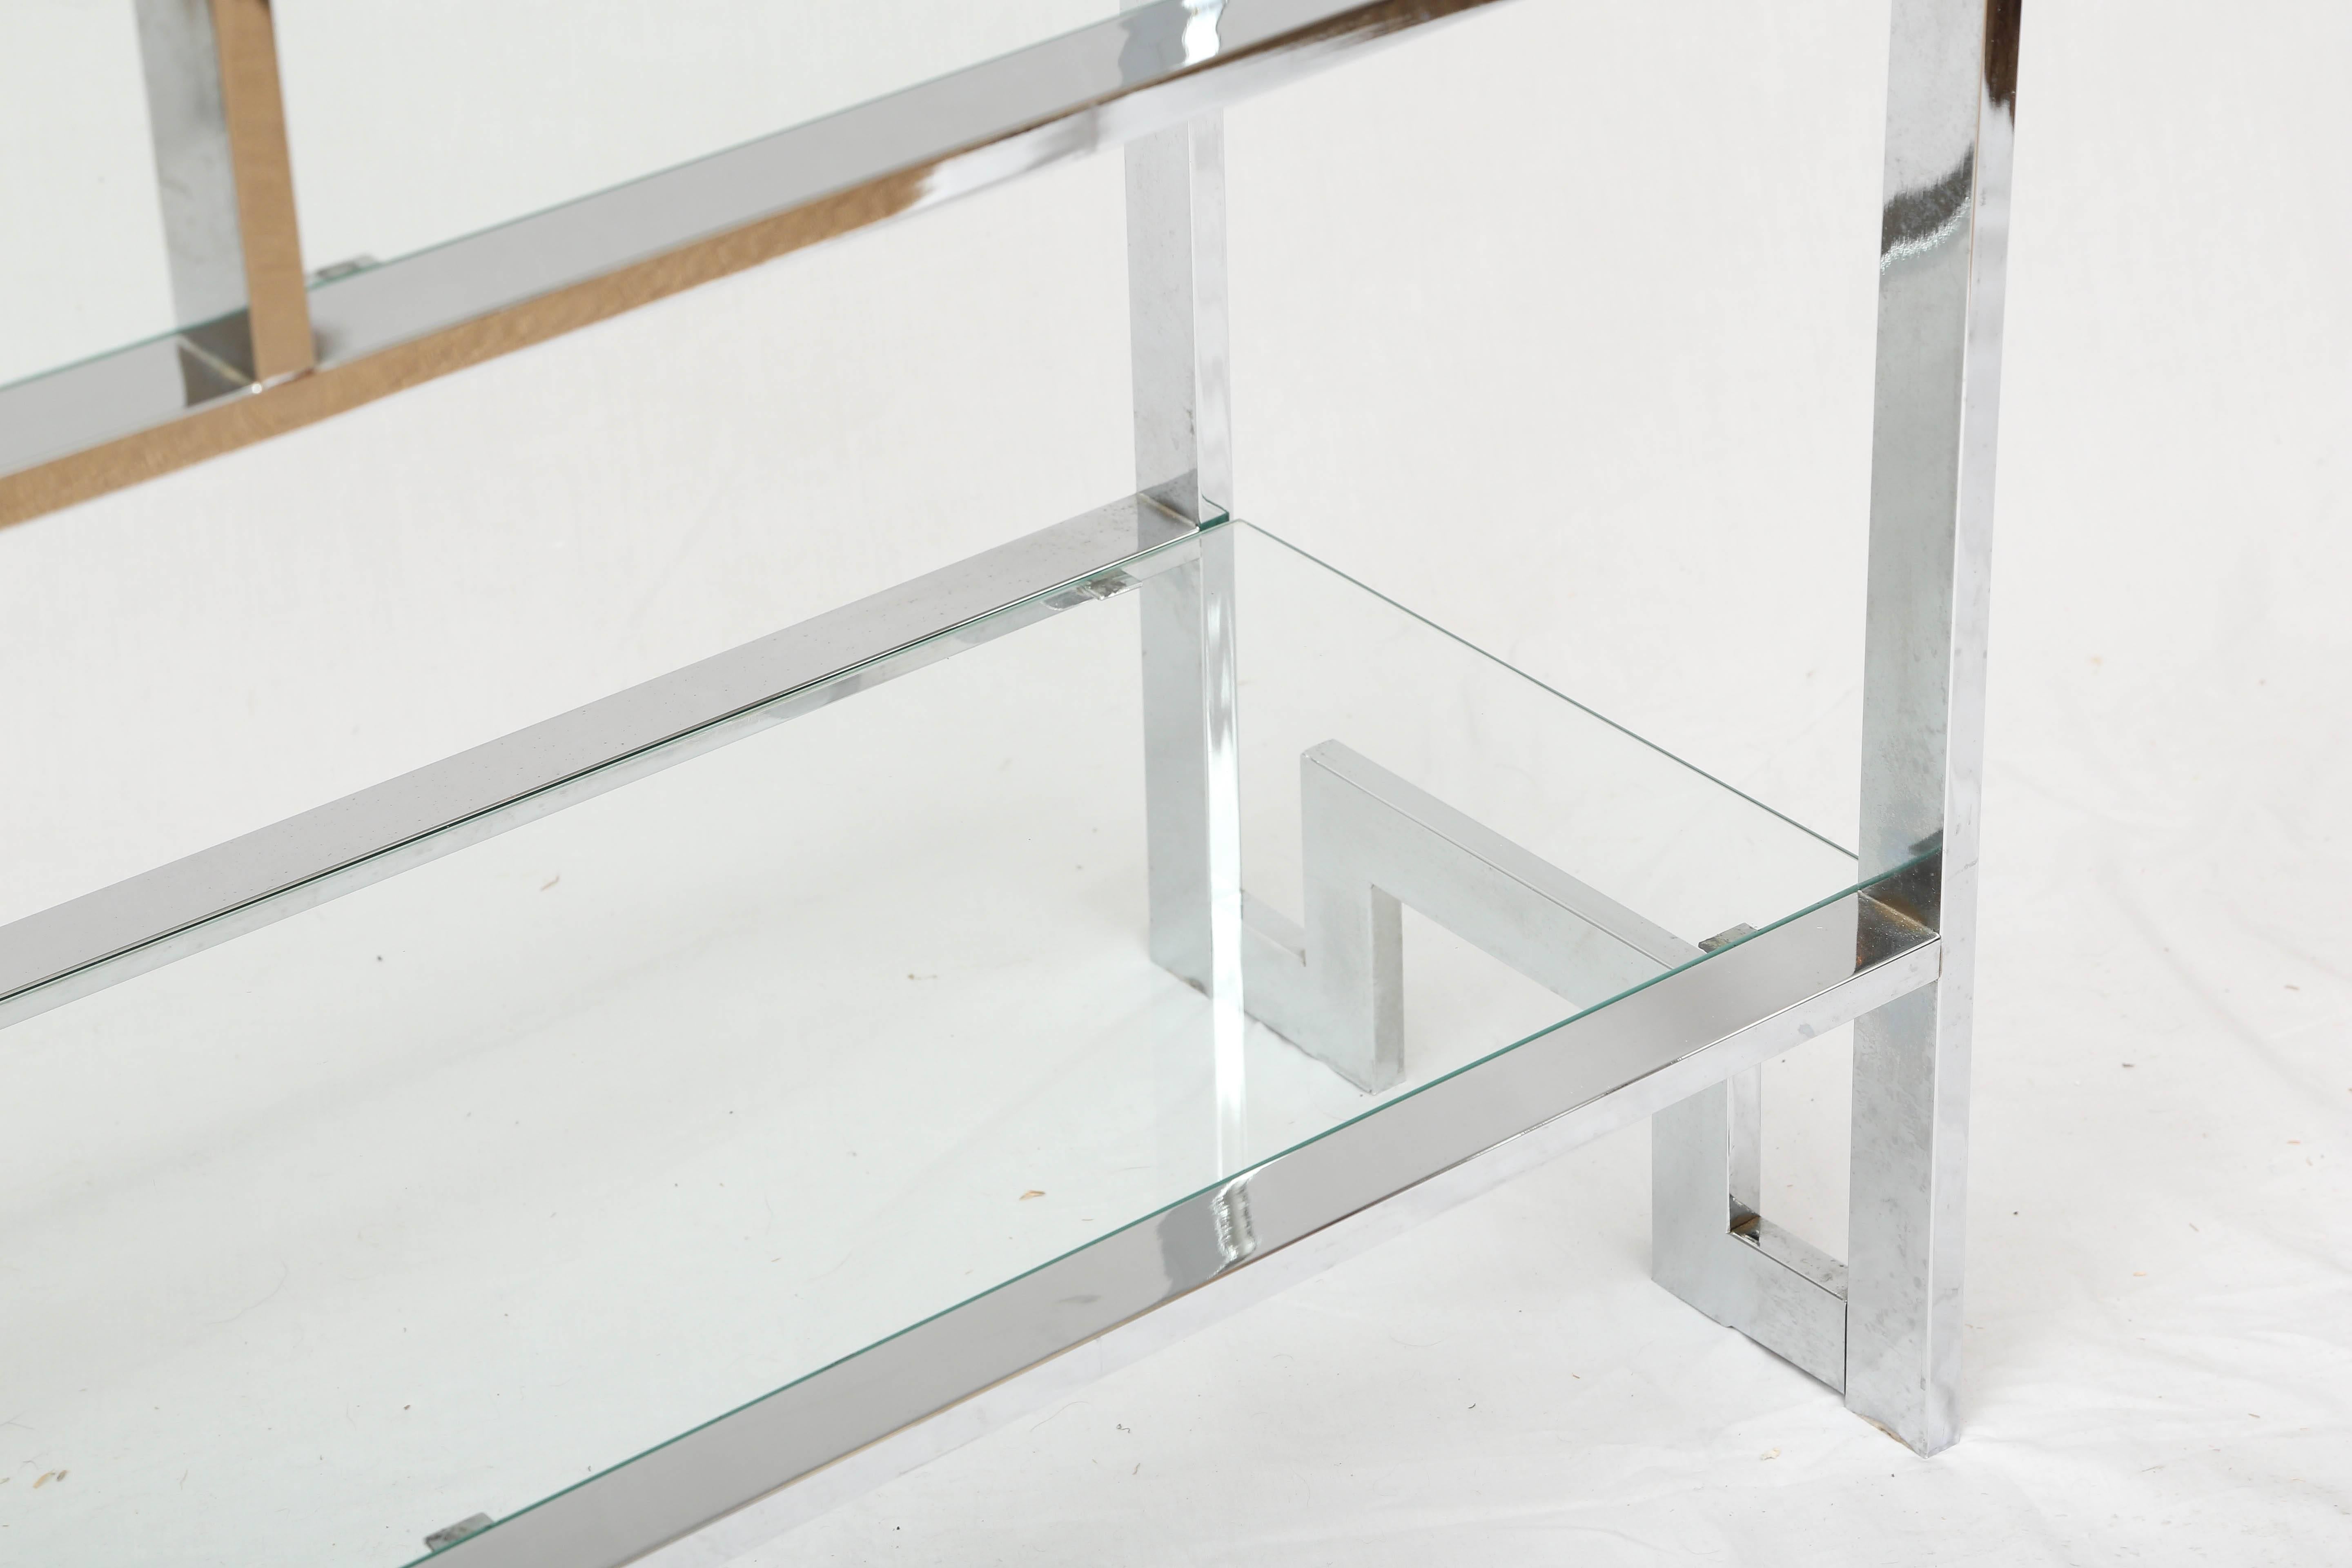 1 of 2 Tall Mid-Century Modern Greek Key Chrome Ètagerè Display Shelve  In Good Condition For Sale In Miami, FL